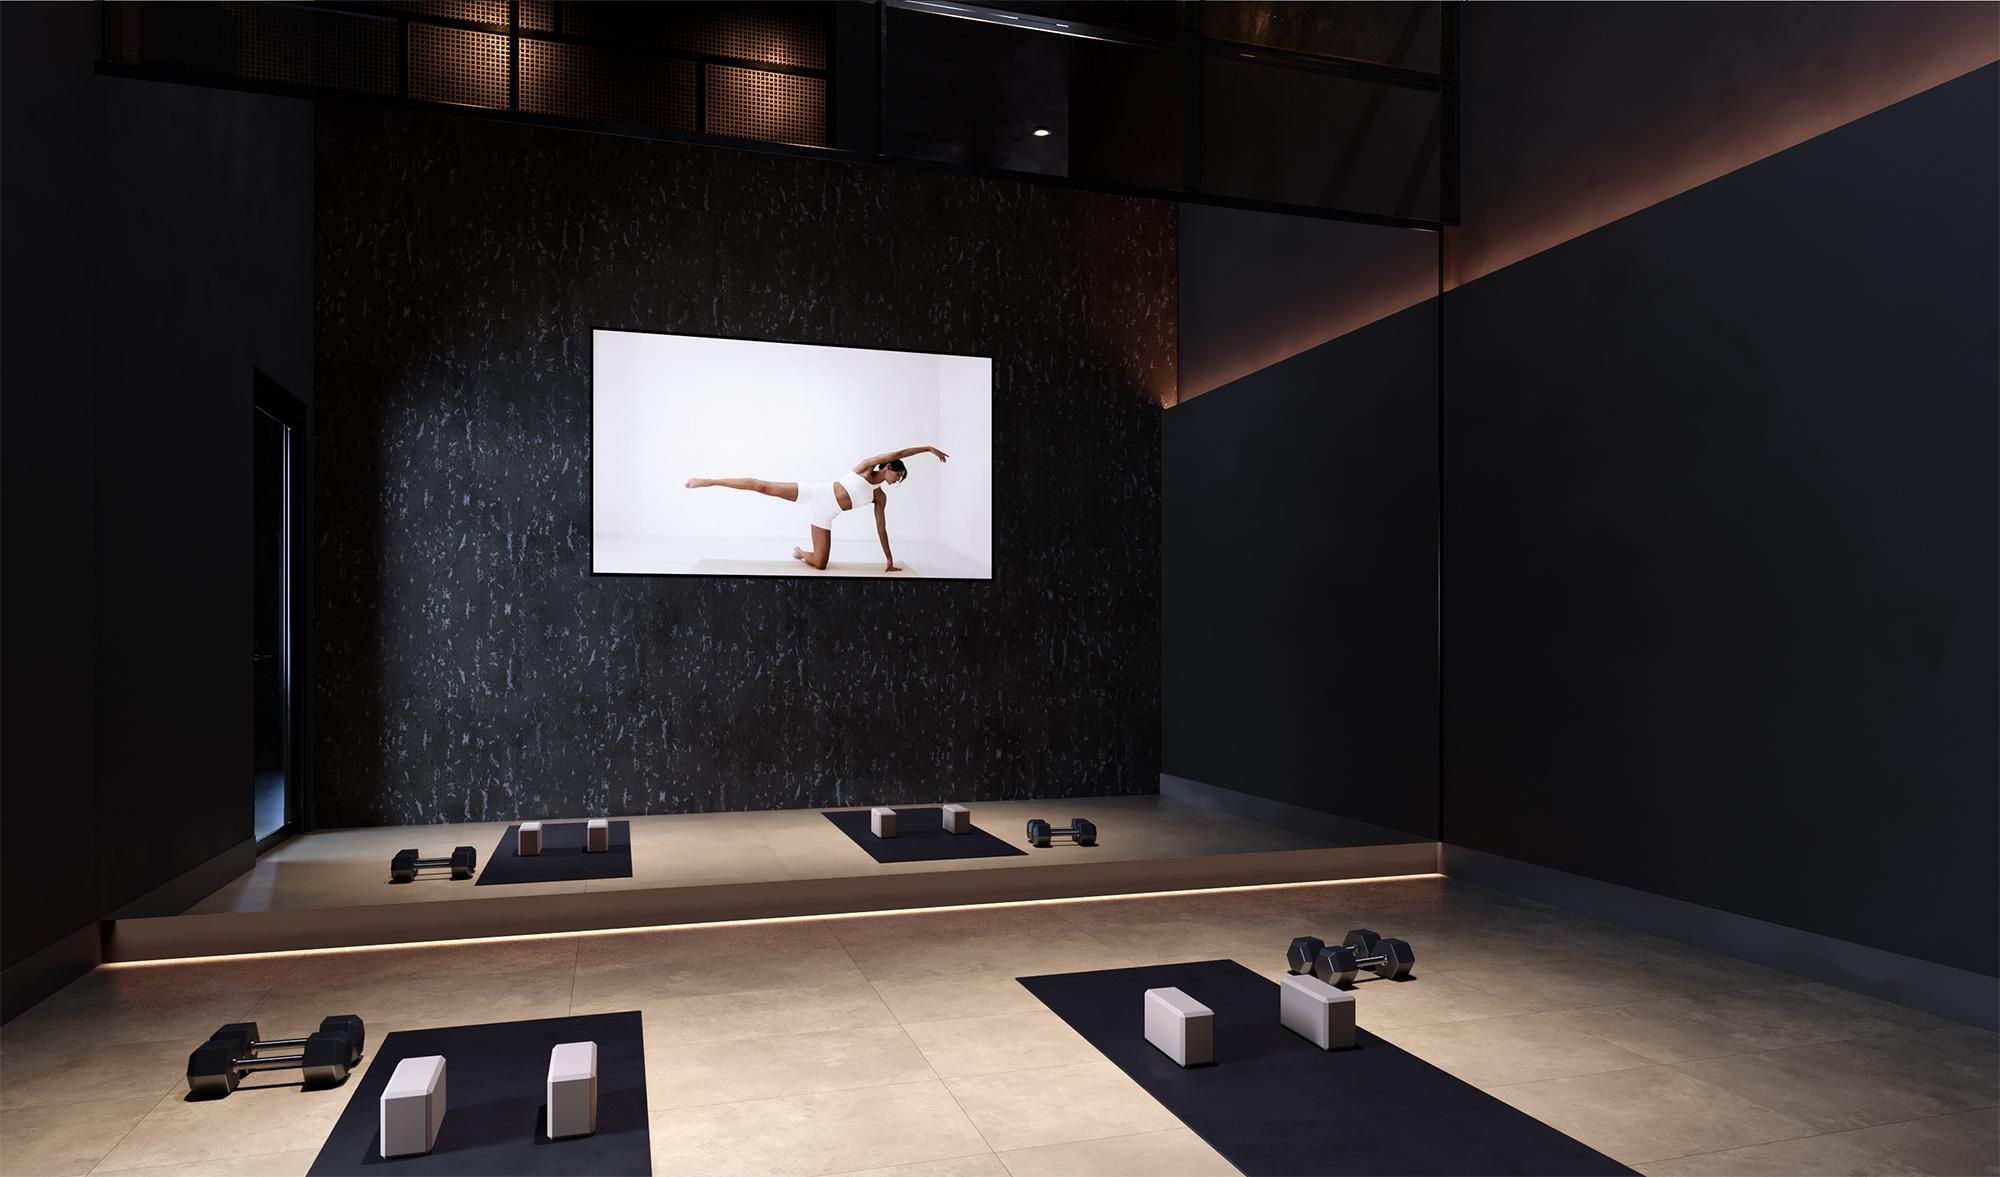 Modern fitness studio at Solana Central Park with dim lighting, weight training equipment, and a large screen displaying a yoga pose.